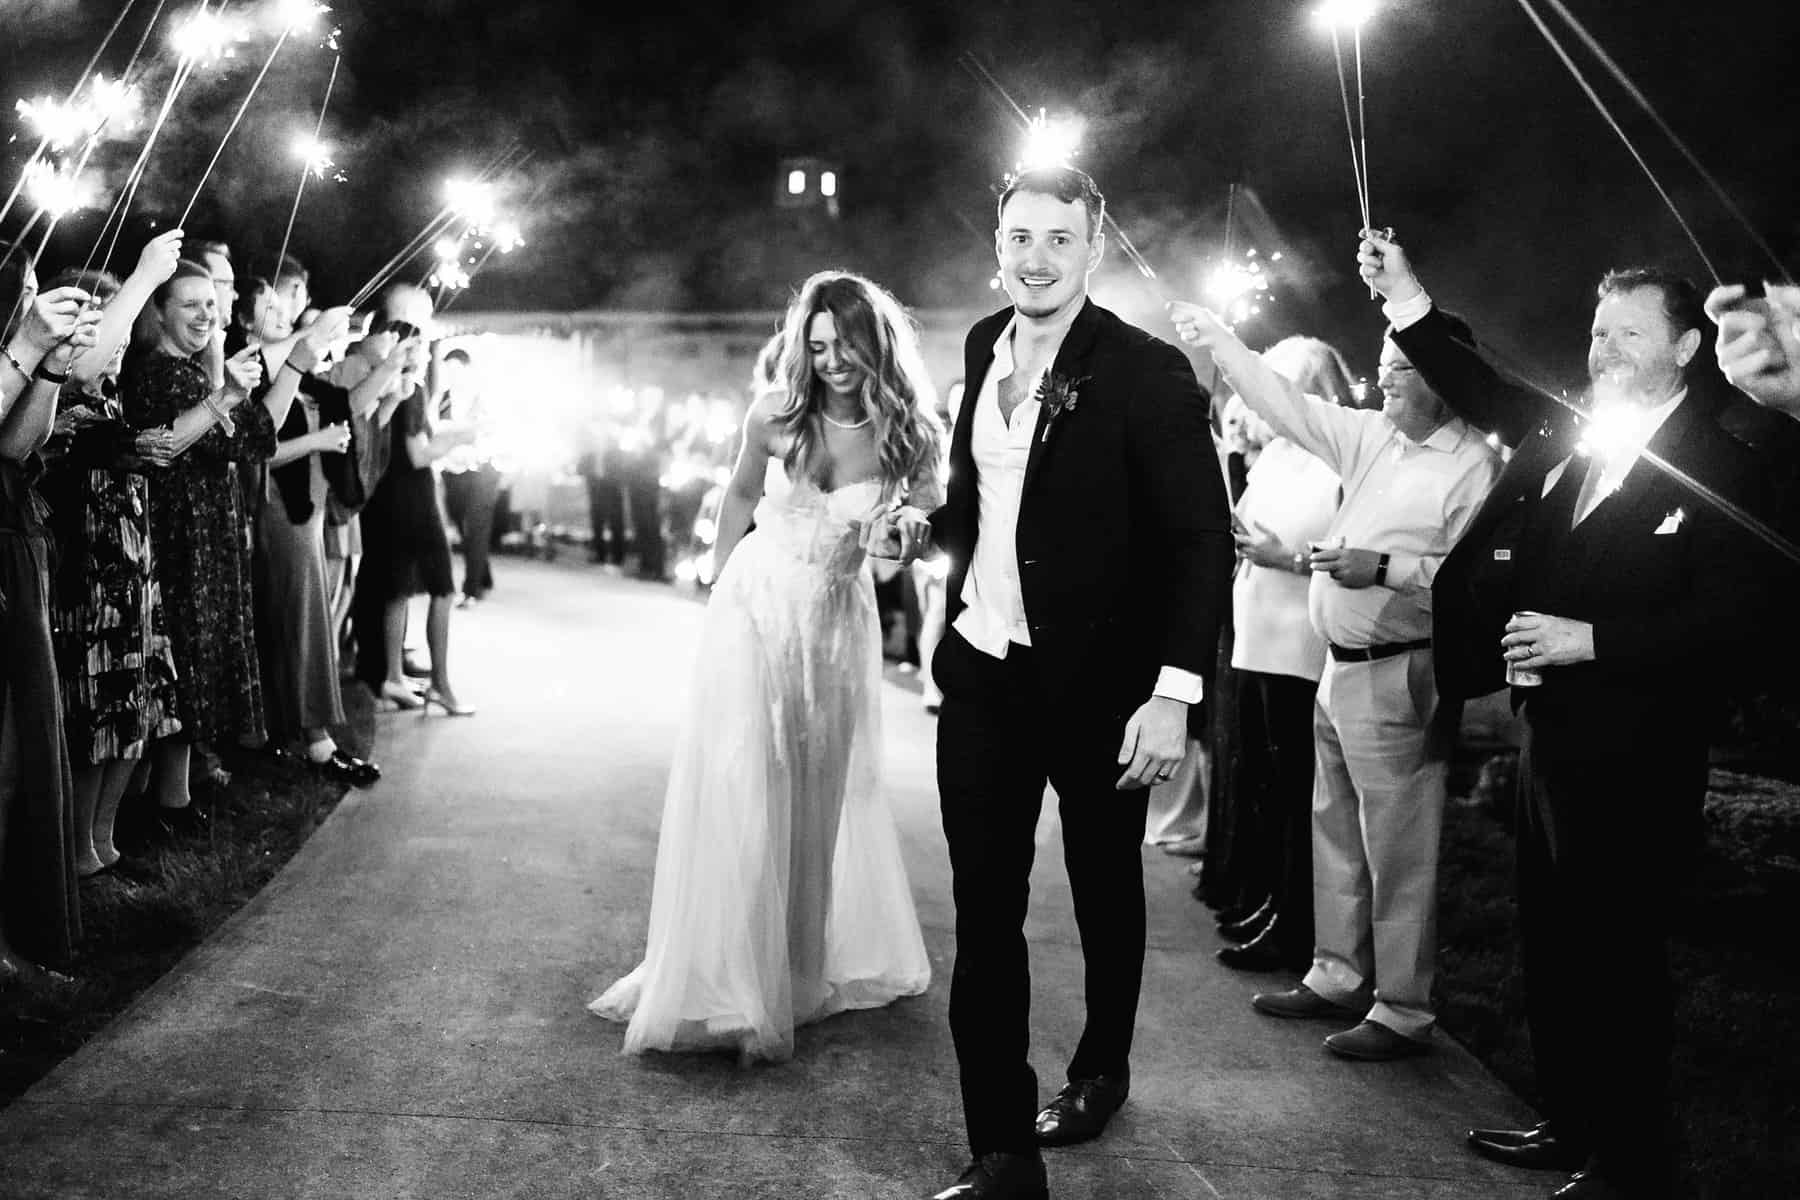 A bride and groom walking down the path with sparklers.